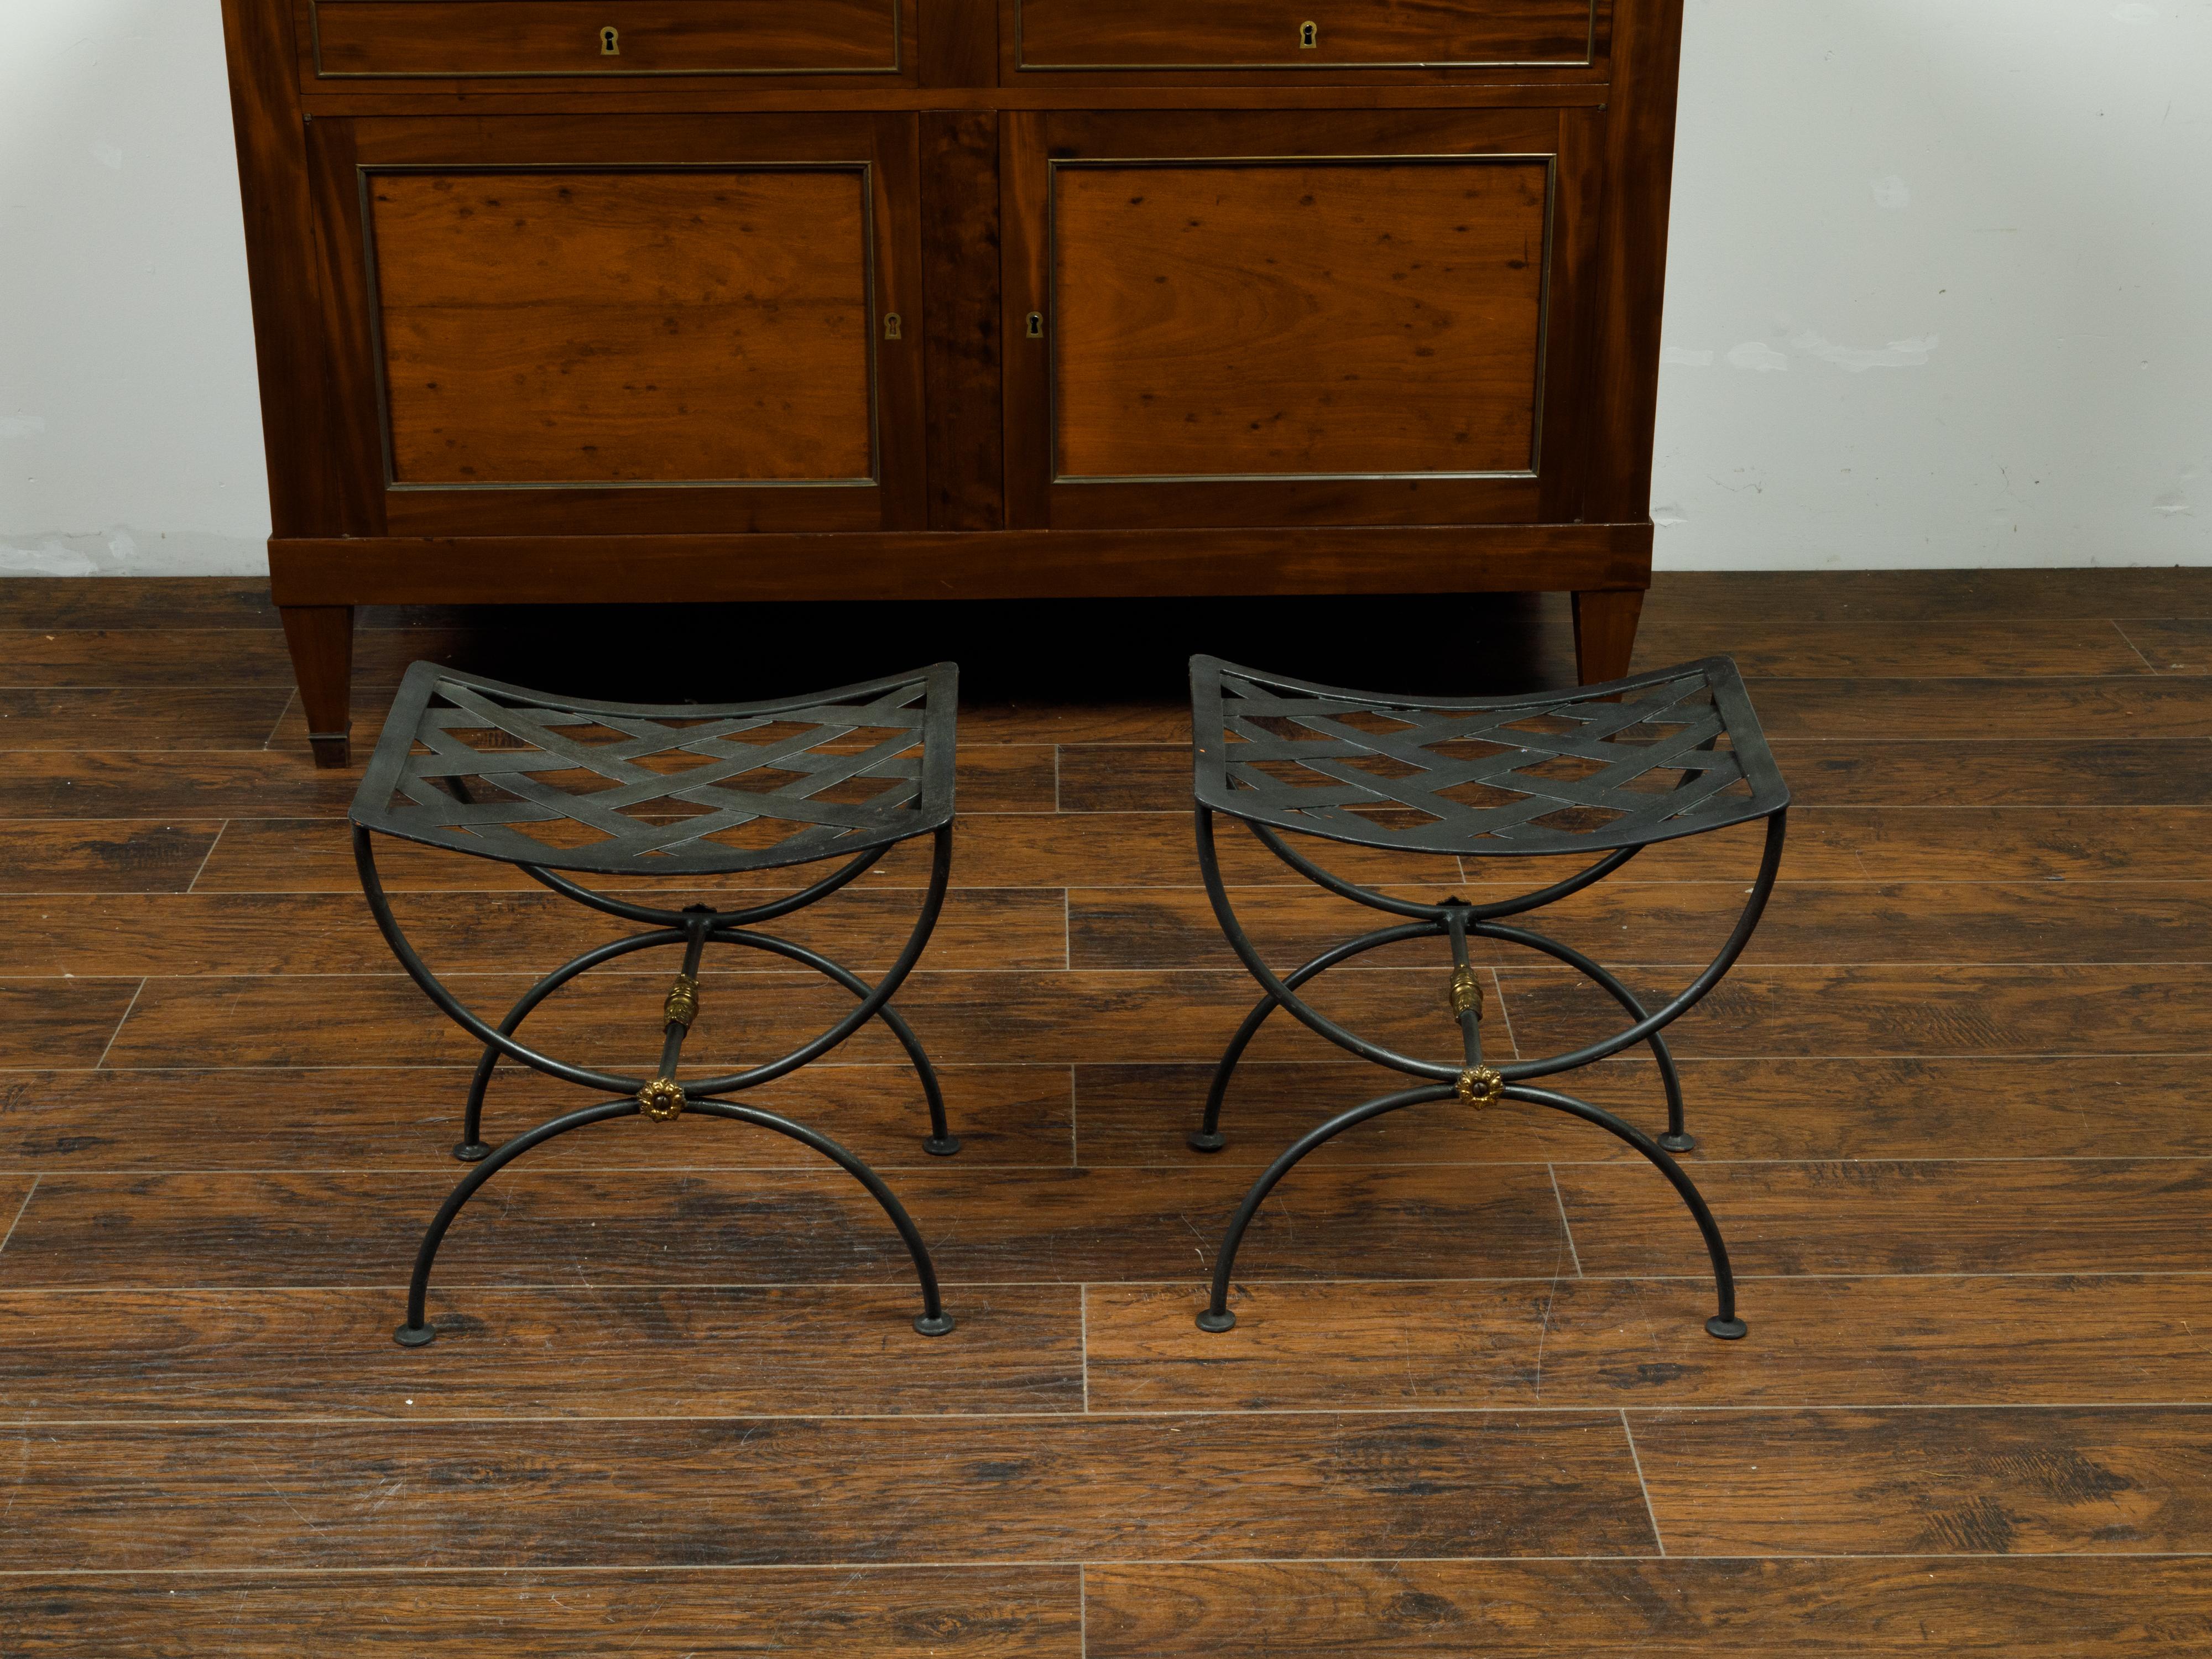 A pair of French vintage iron curule stools from the mid 20th century, with latticed tops and X-form bases. Created in France during the midcentury period, each of this pair of iron stools features a curving latticed top sitting above a double